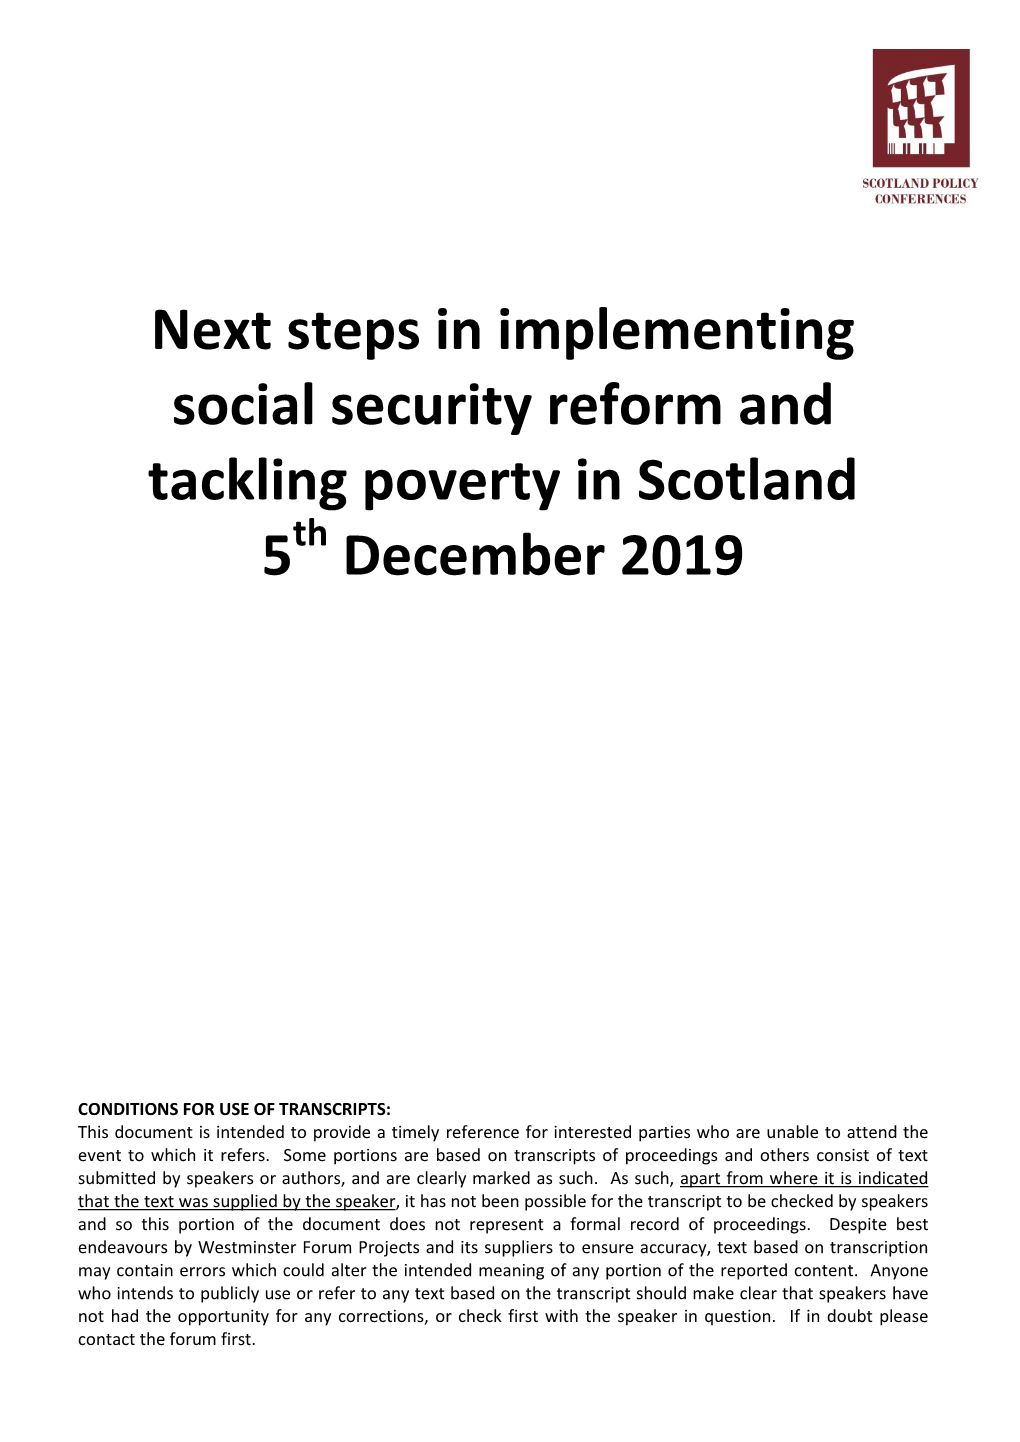 Next Steps in Implementing Social Security Reform and Tackling Poverty in Scotland 5Th December 2019